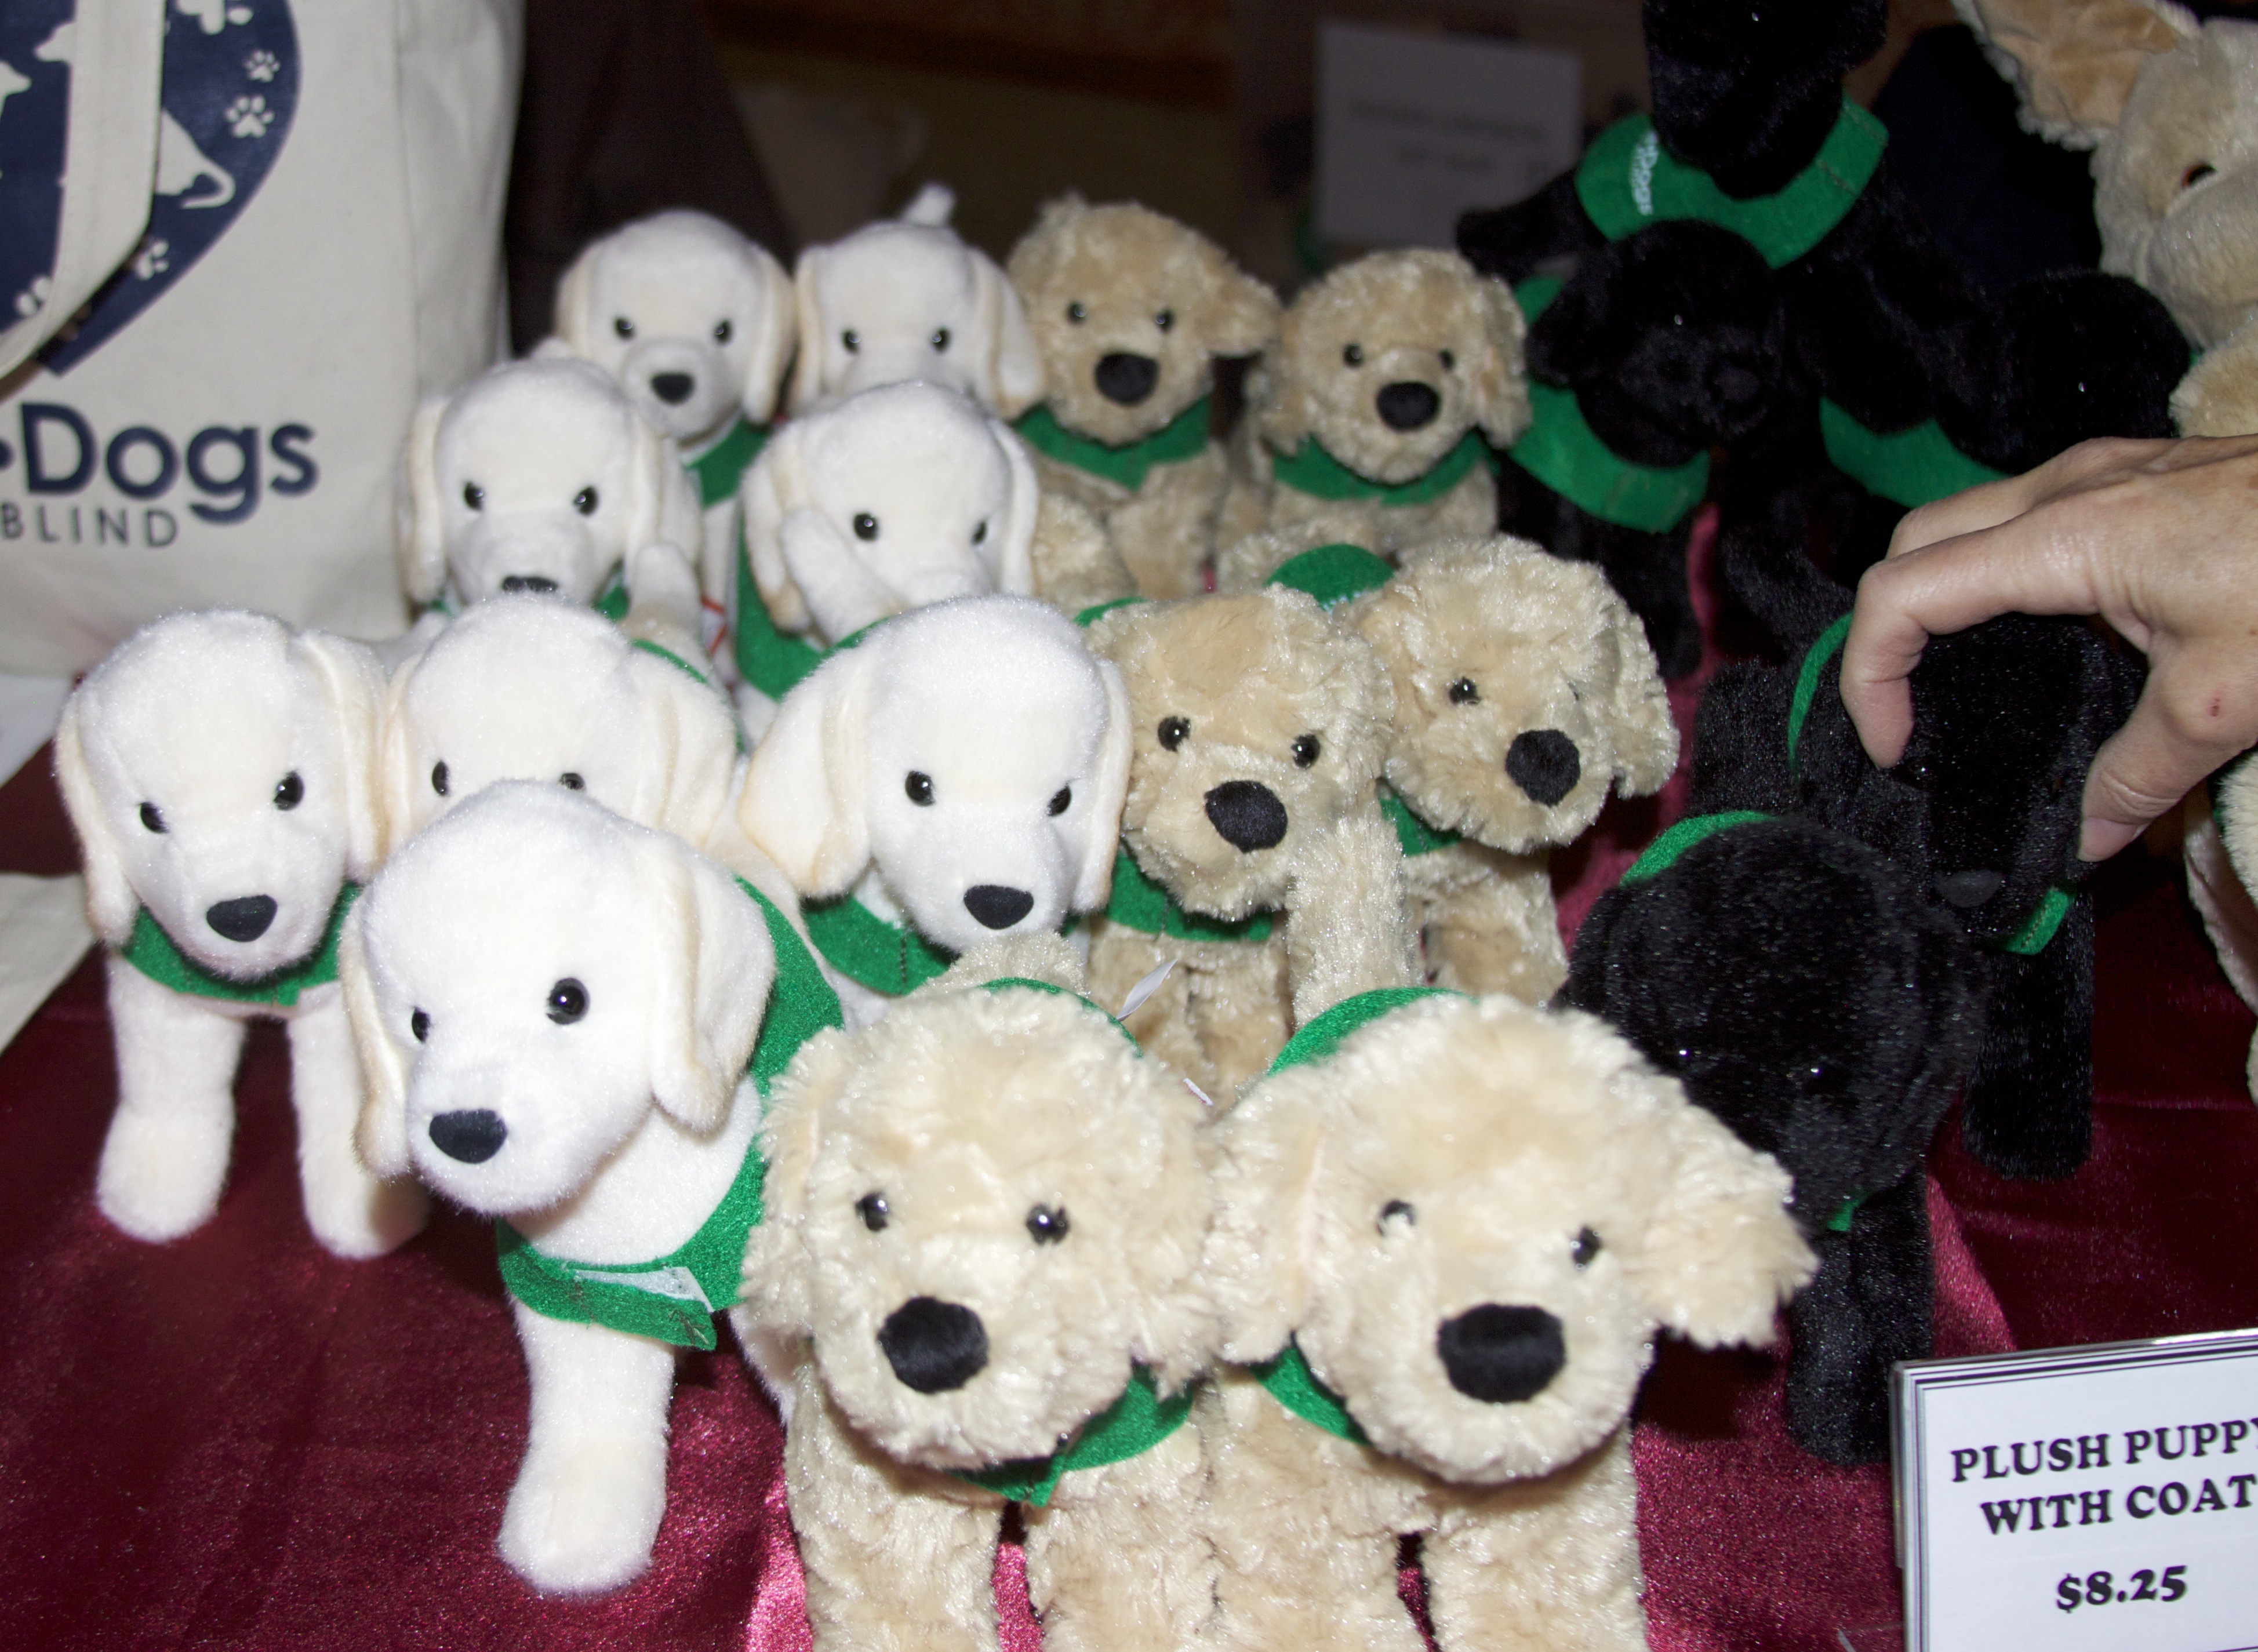 Stuffed Plush Guide Dog Puppies With Coats